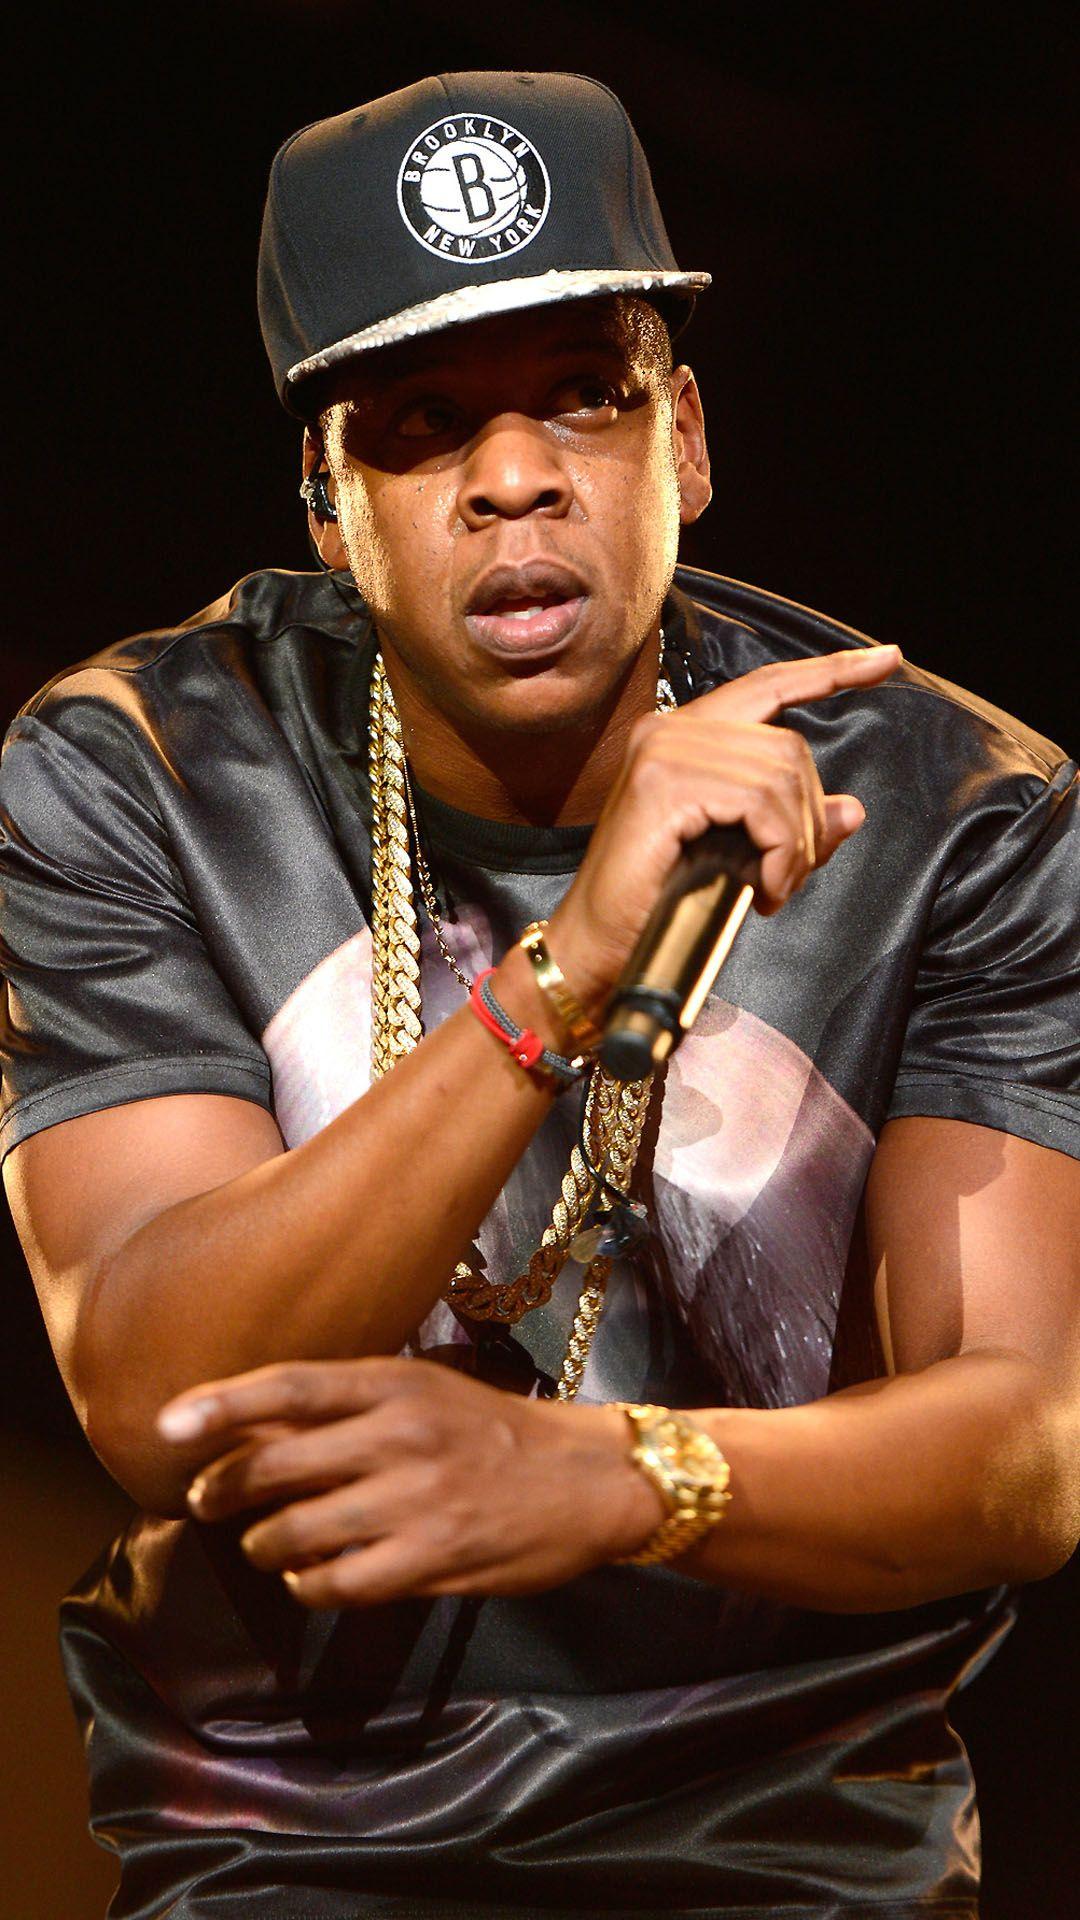 Jay Z Singer Android Wallpaper free download